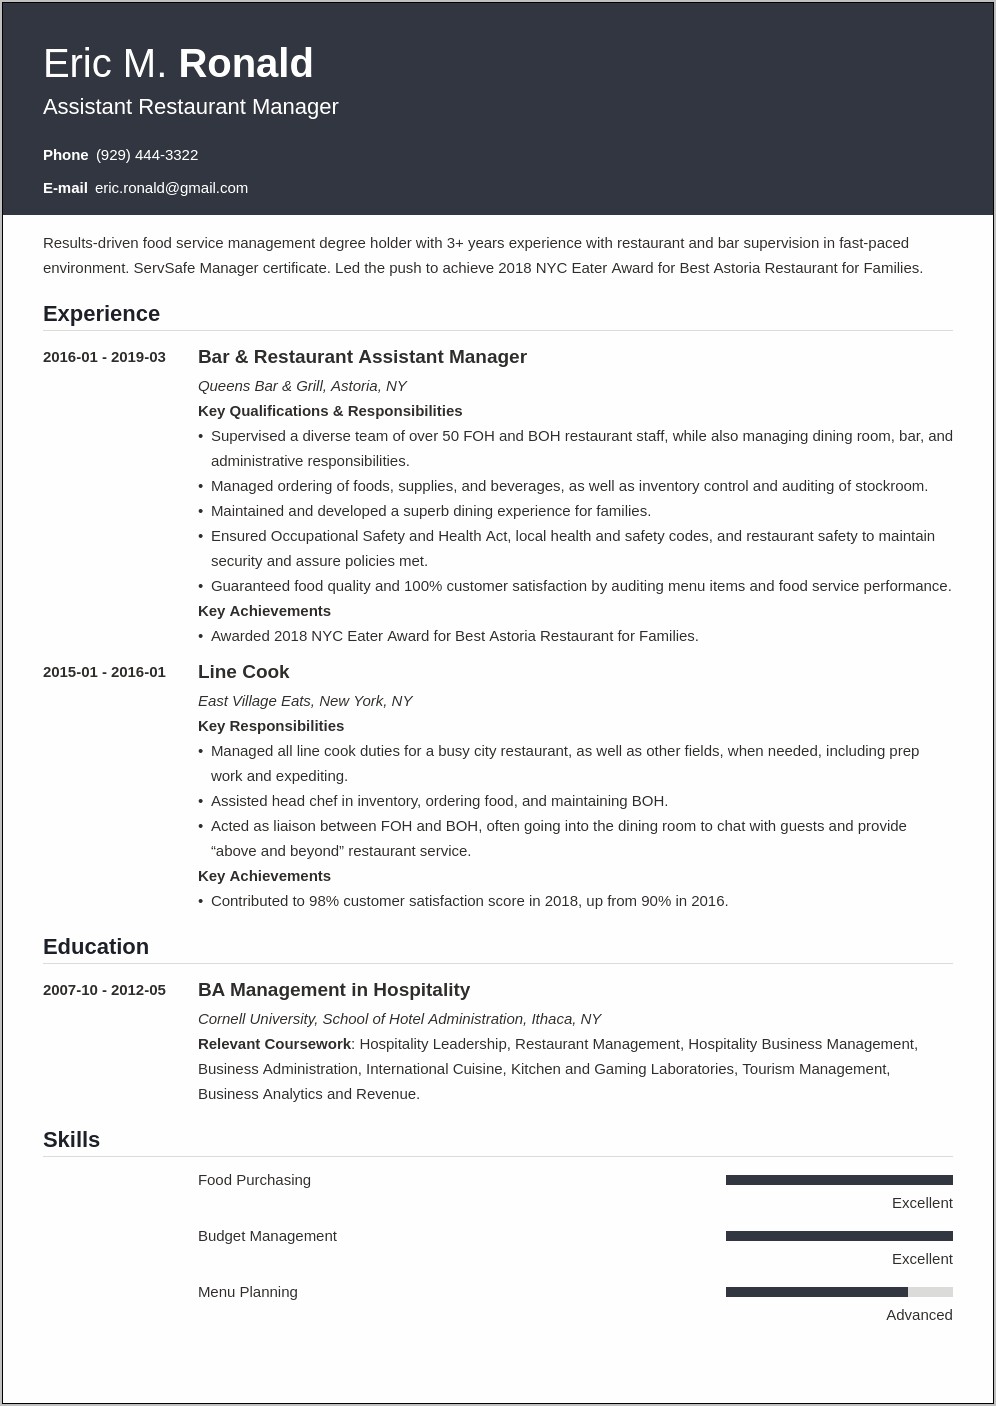 Resume Summary Assistant Manager Restaurant